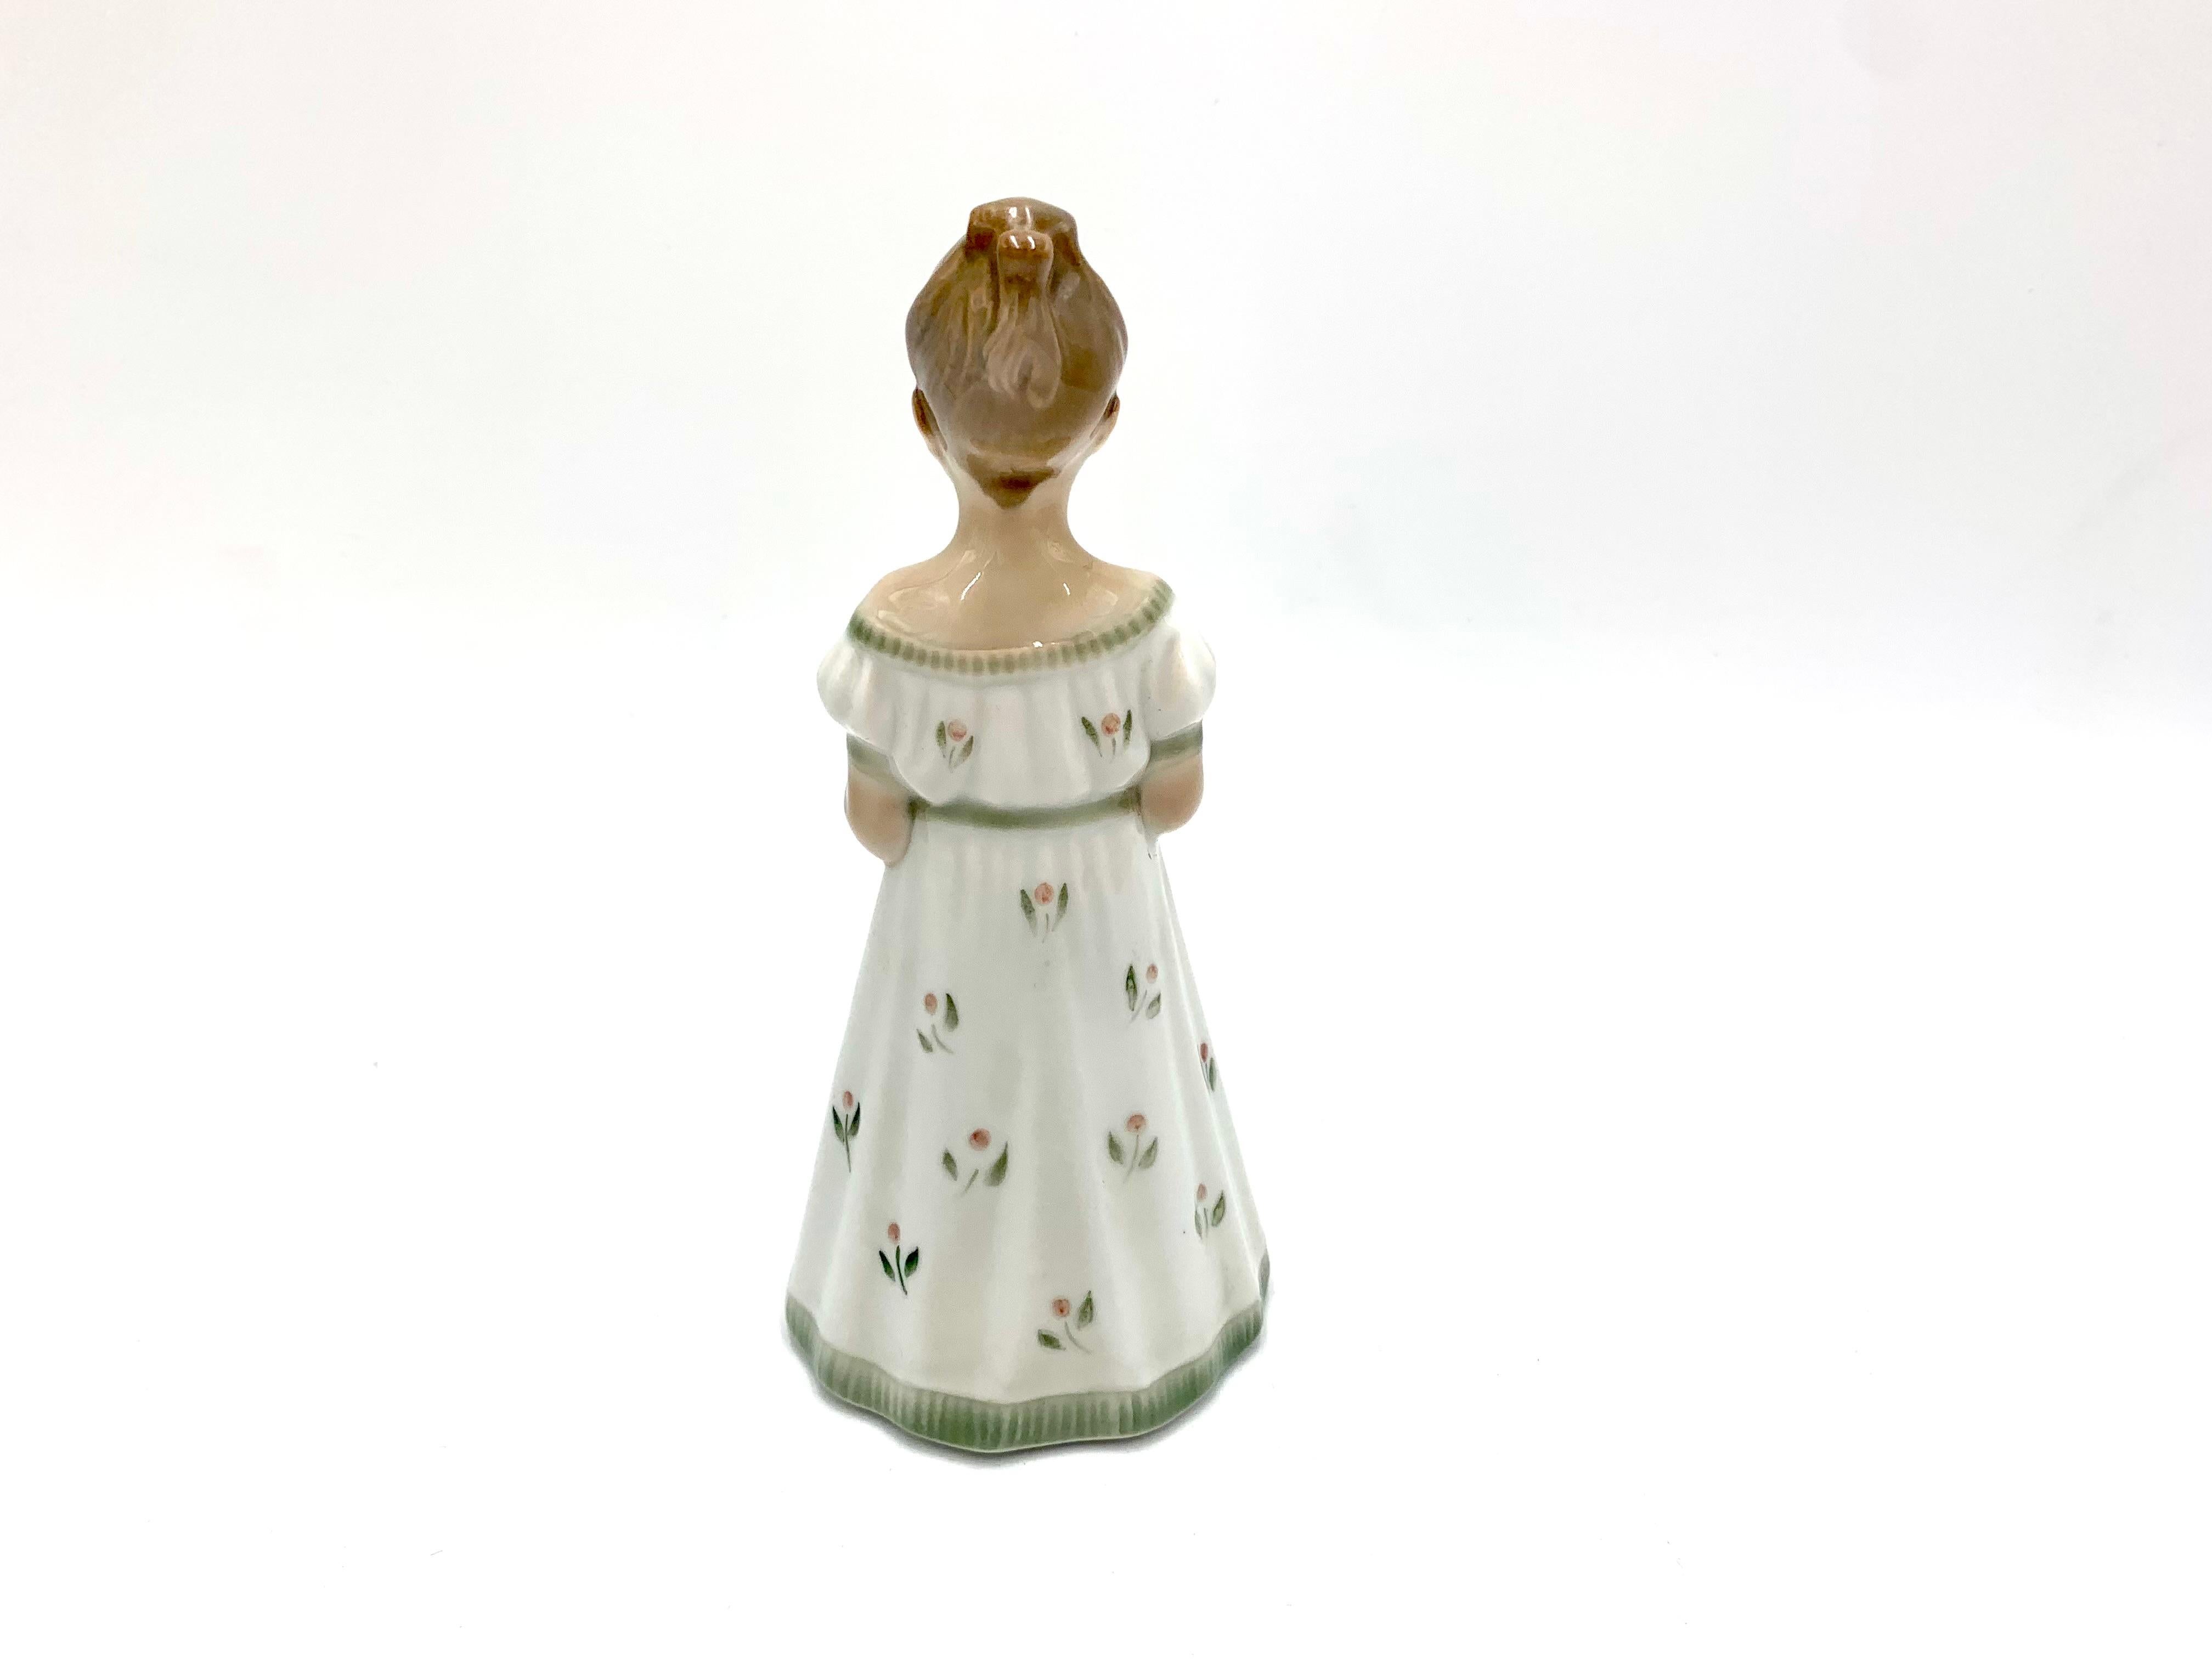 Porcelain figurine of a woman with a book

Made in Denmark by the Lyngby manufactory

Manufactured in the 1960s.

Very good condition, no damage

Measures: height 18.5 cm width 8.5 cm depth 7 cm.